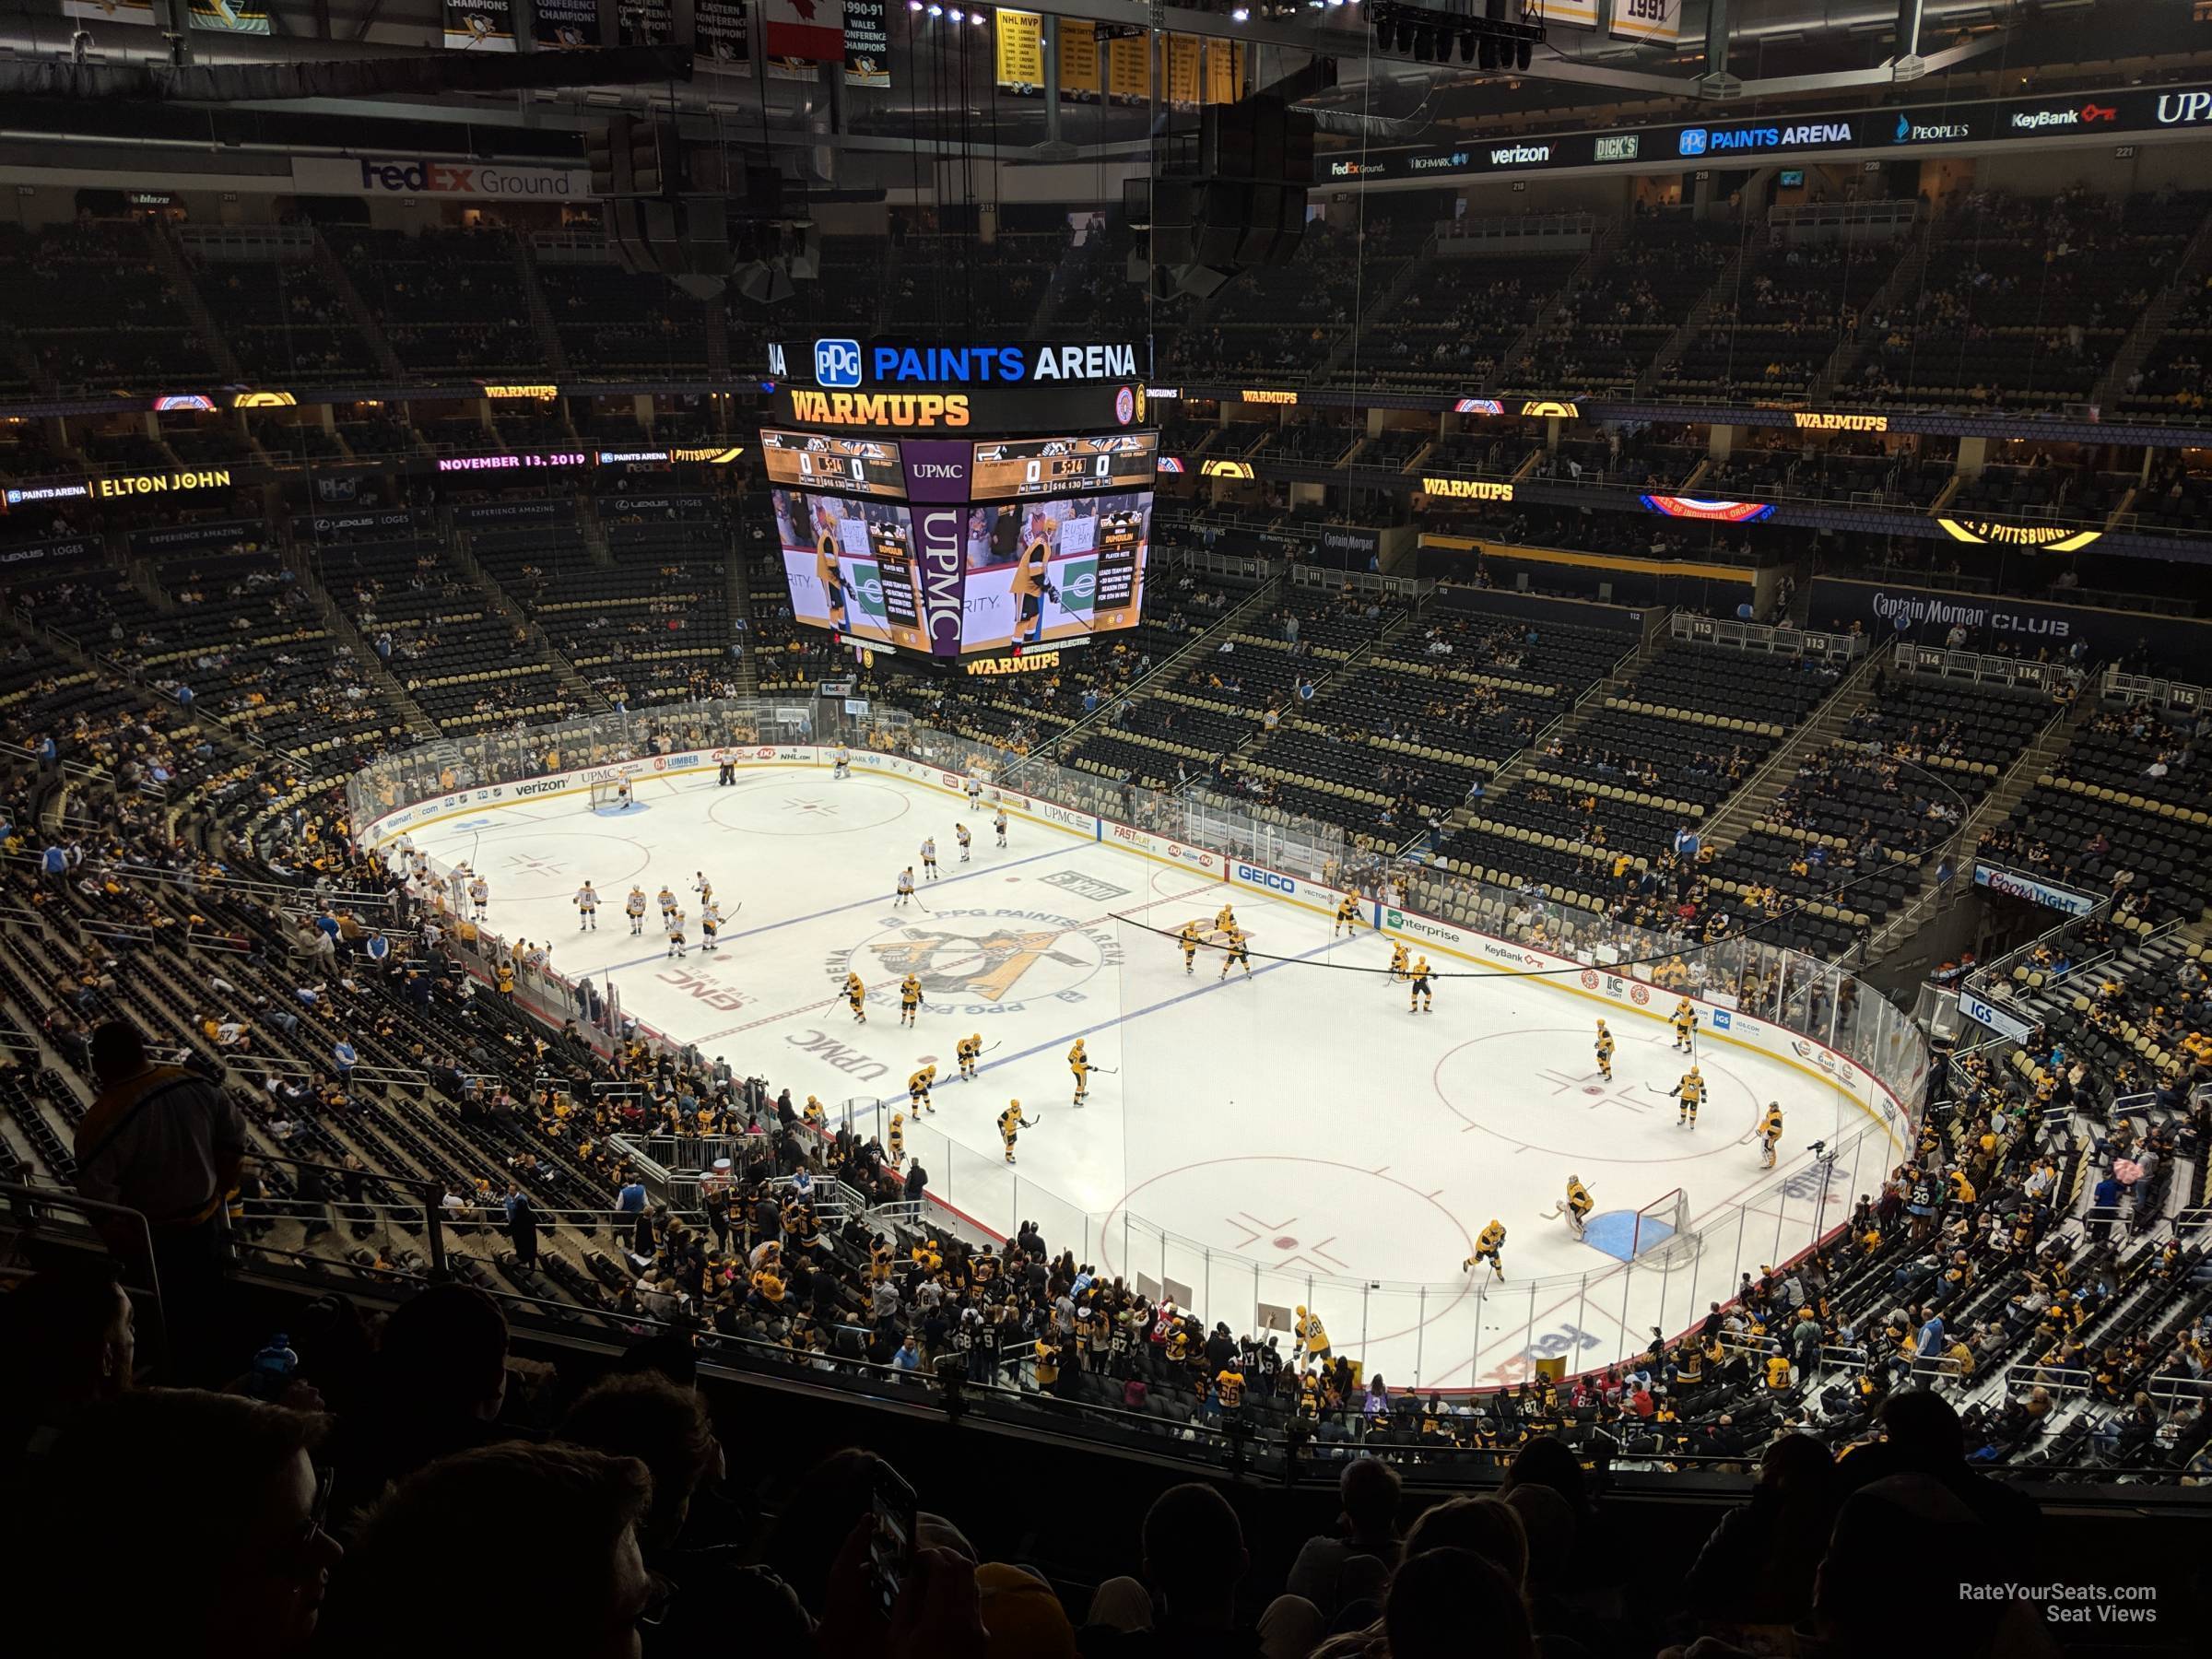 Section 234 at PPG Paints Arena 